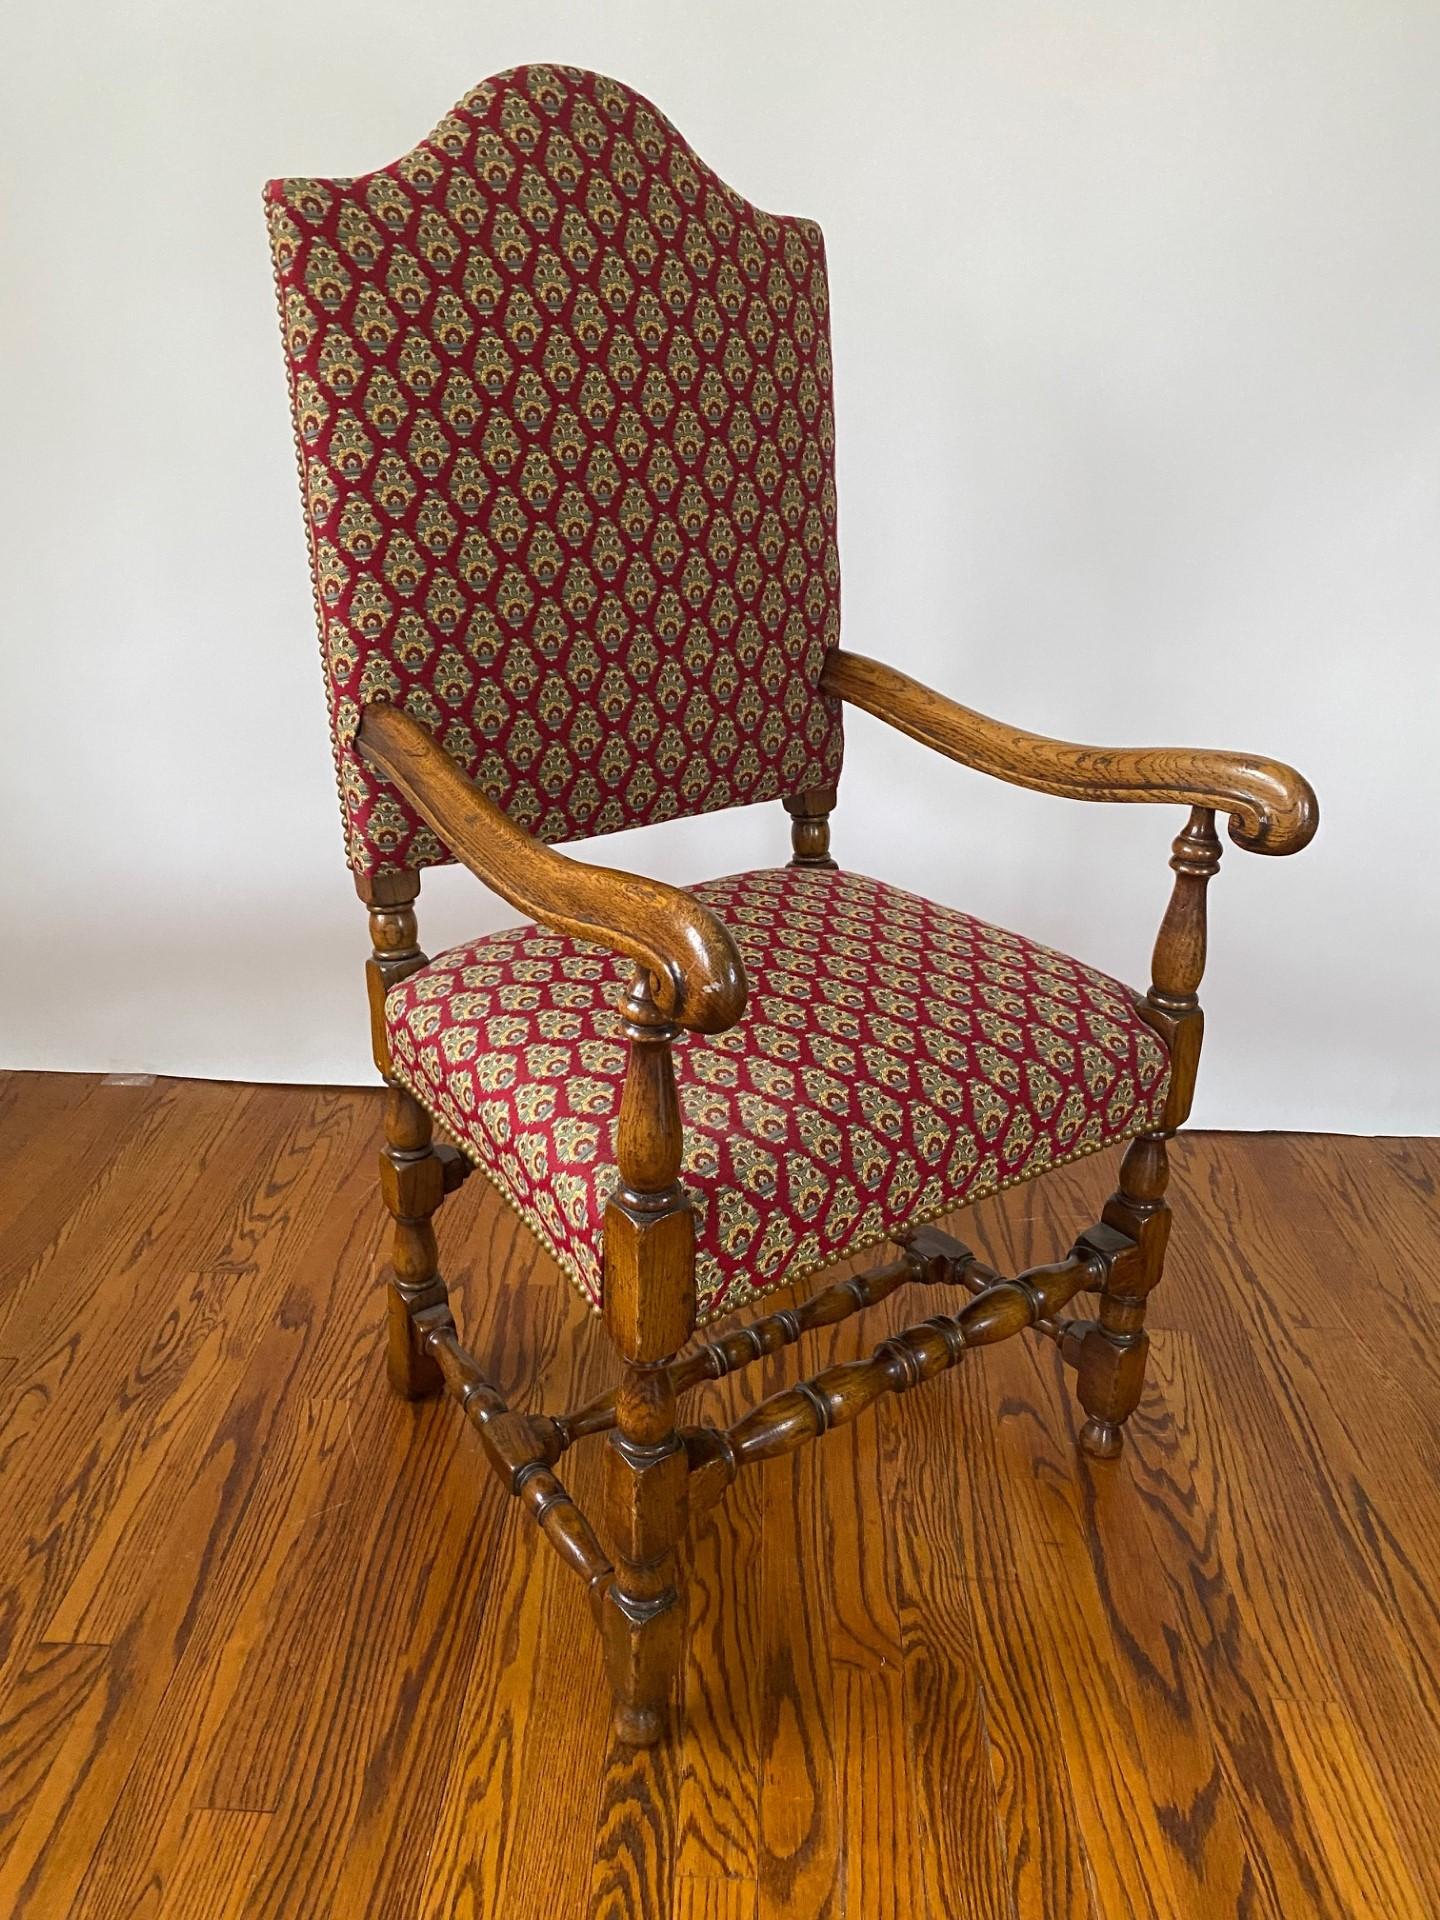 English-Made Late 17th Century Style Solid Oak High Back Side & Arm Chair (Englisch) im Angebot